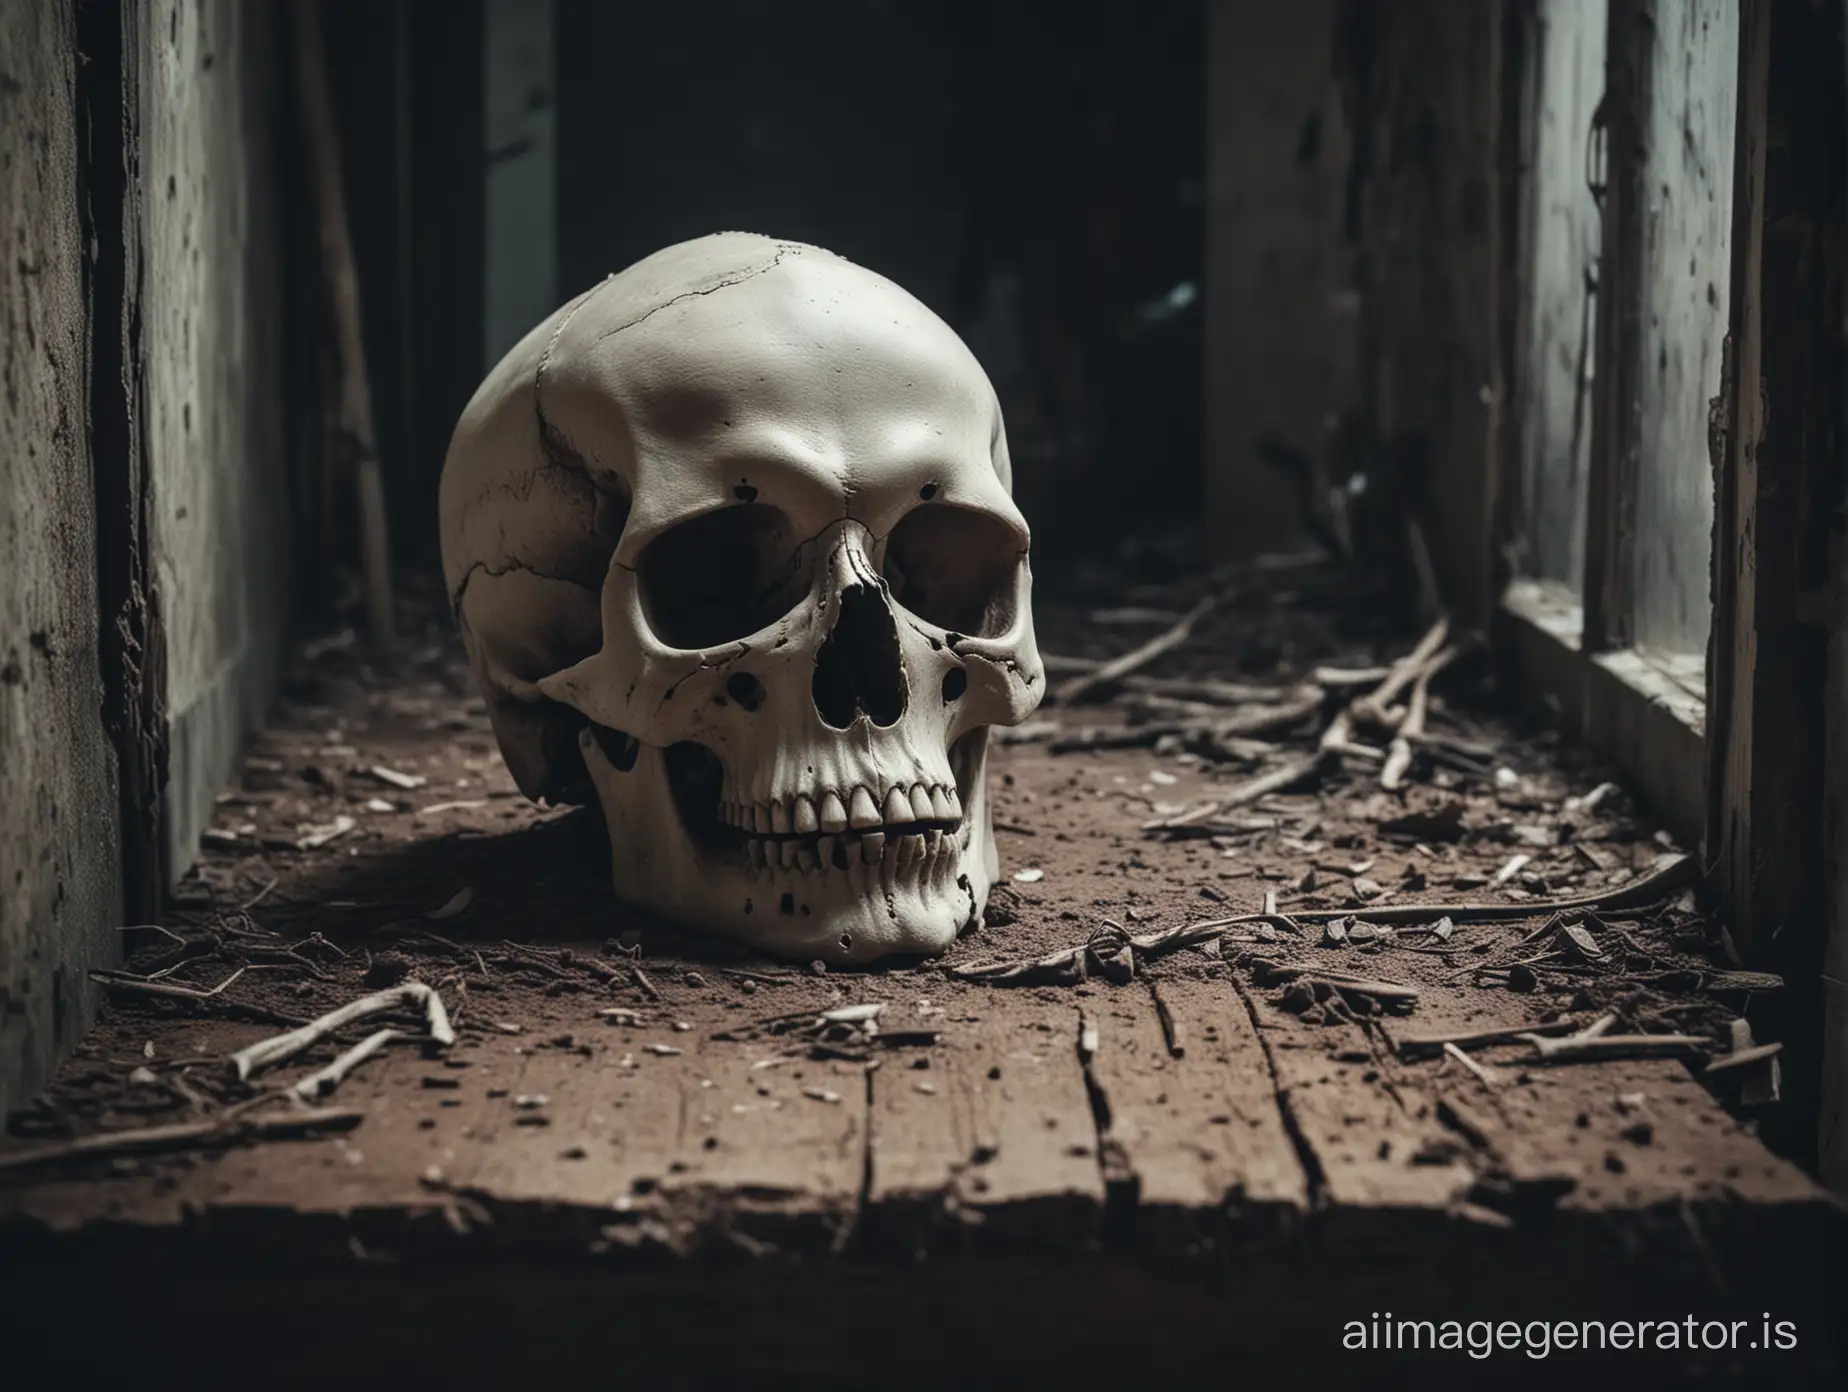 A scary skull in a creepy place